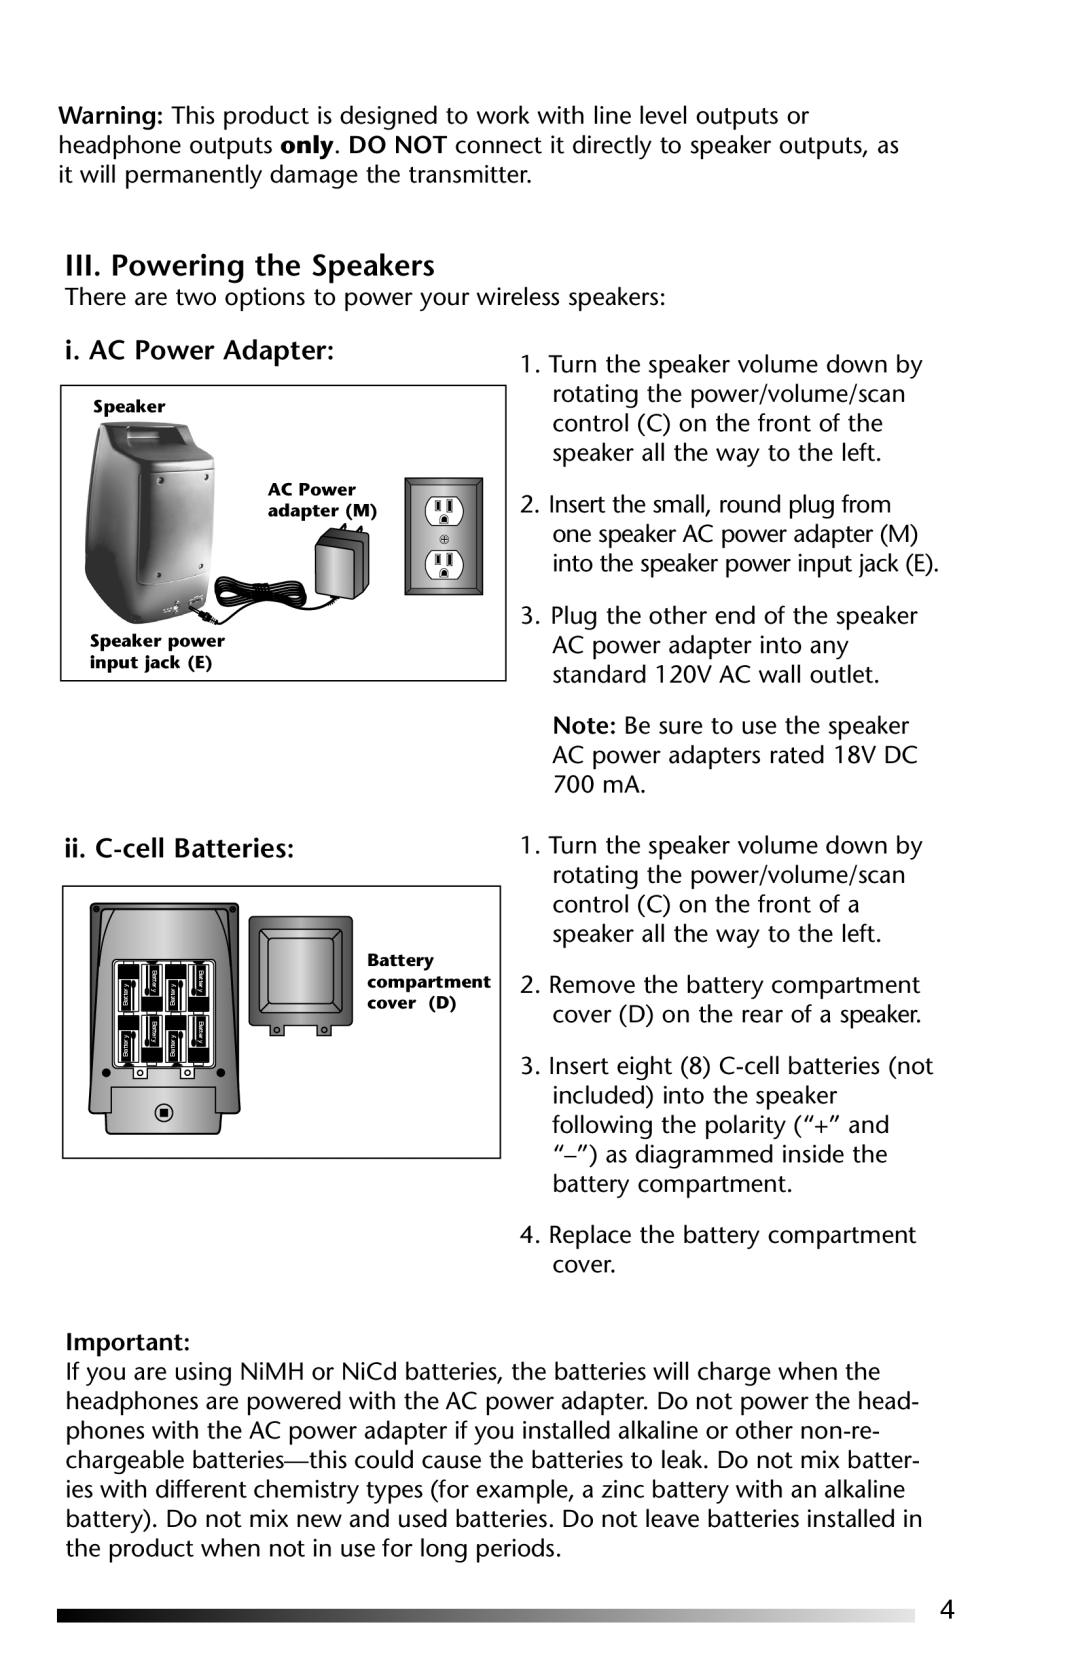 Acoustic Research AW-871 operation manual III. Powering the Speakers, i. AC Power Adapter, ii. C-cellBatteries 